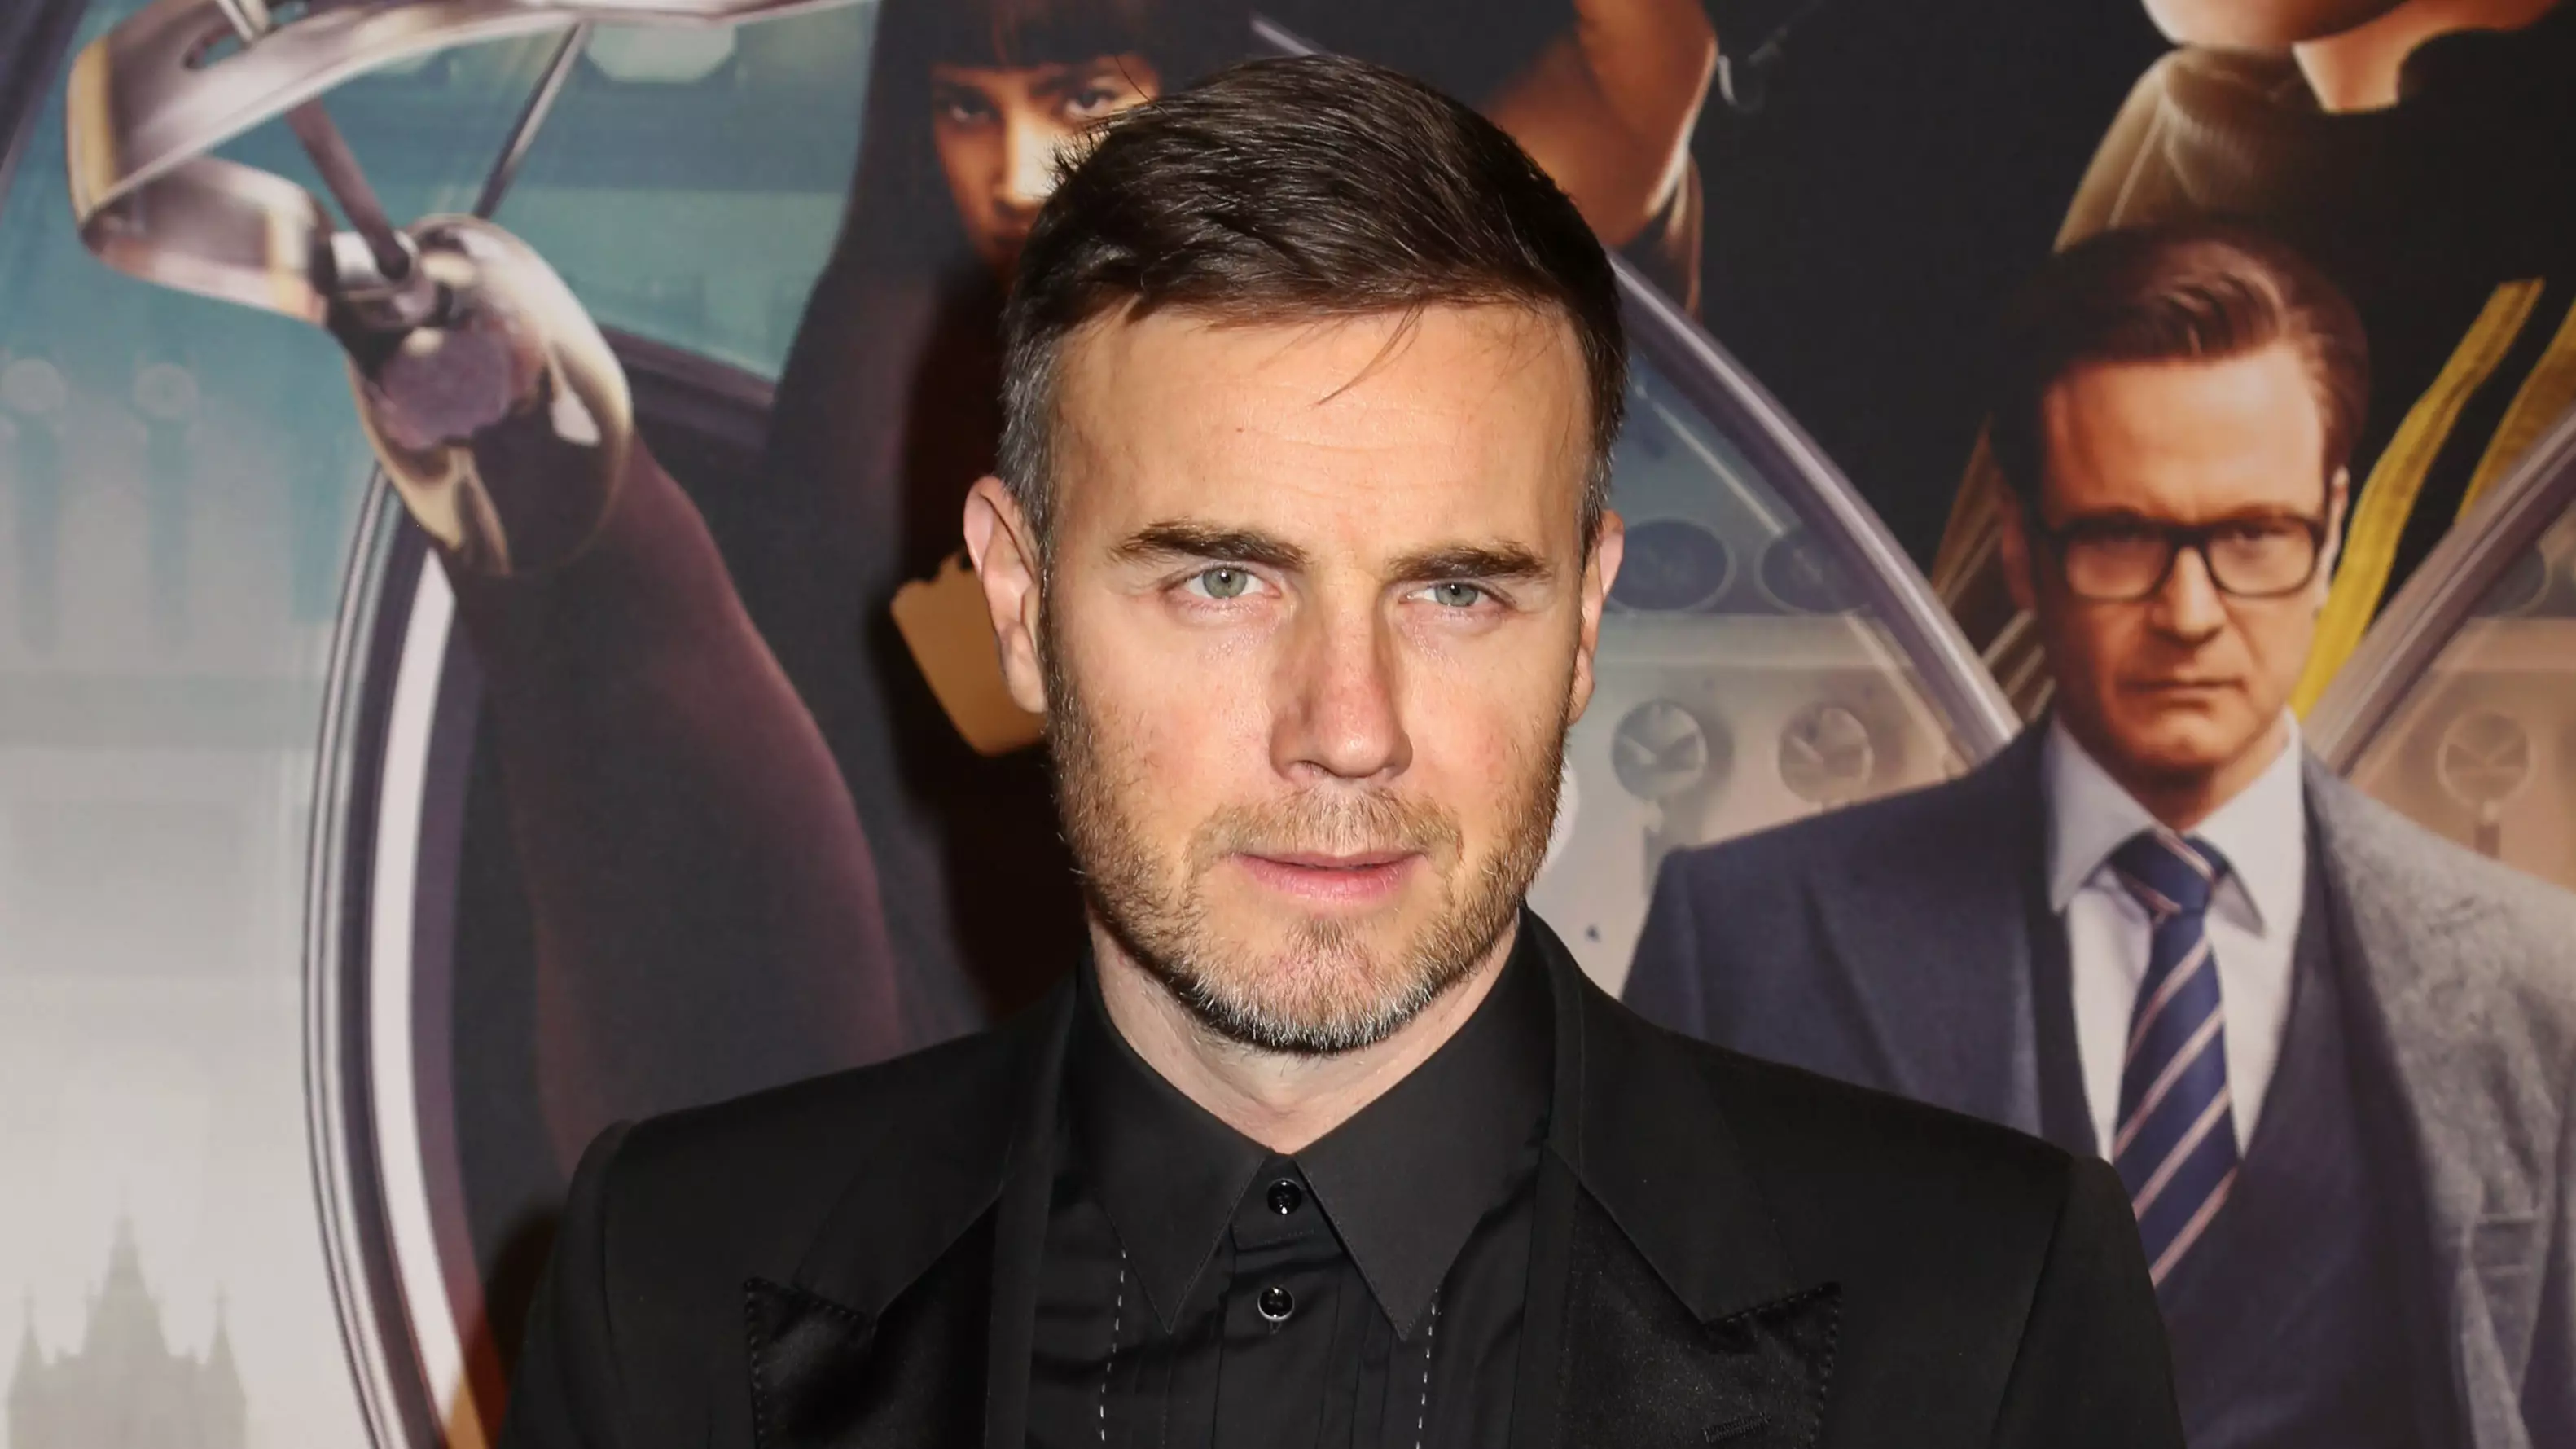 Gary Barlow Bravely Opens Up About 'Mental Breakdown' After Stillbirth